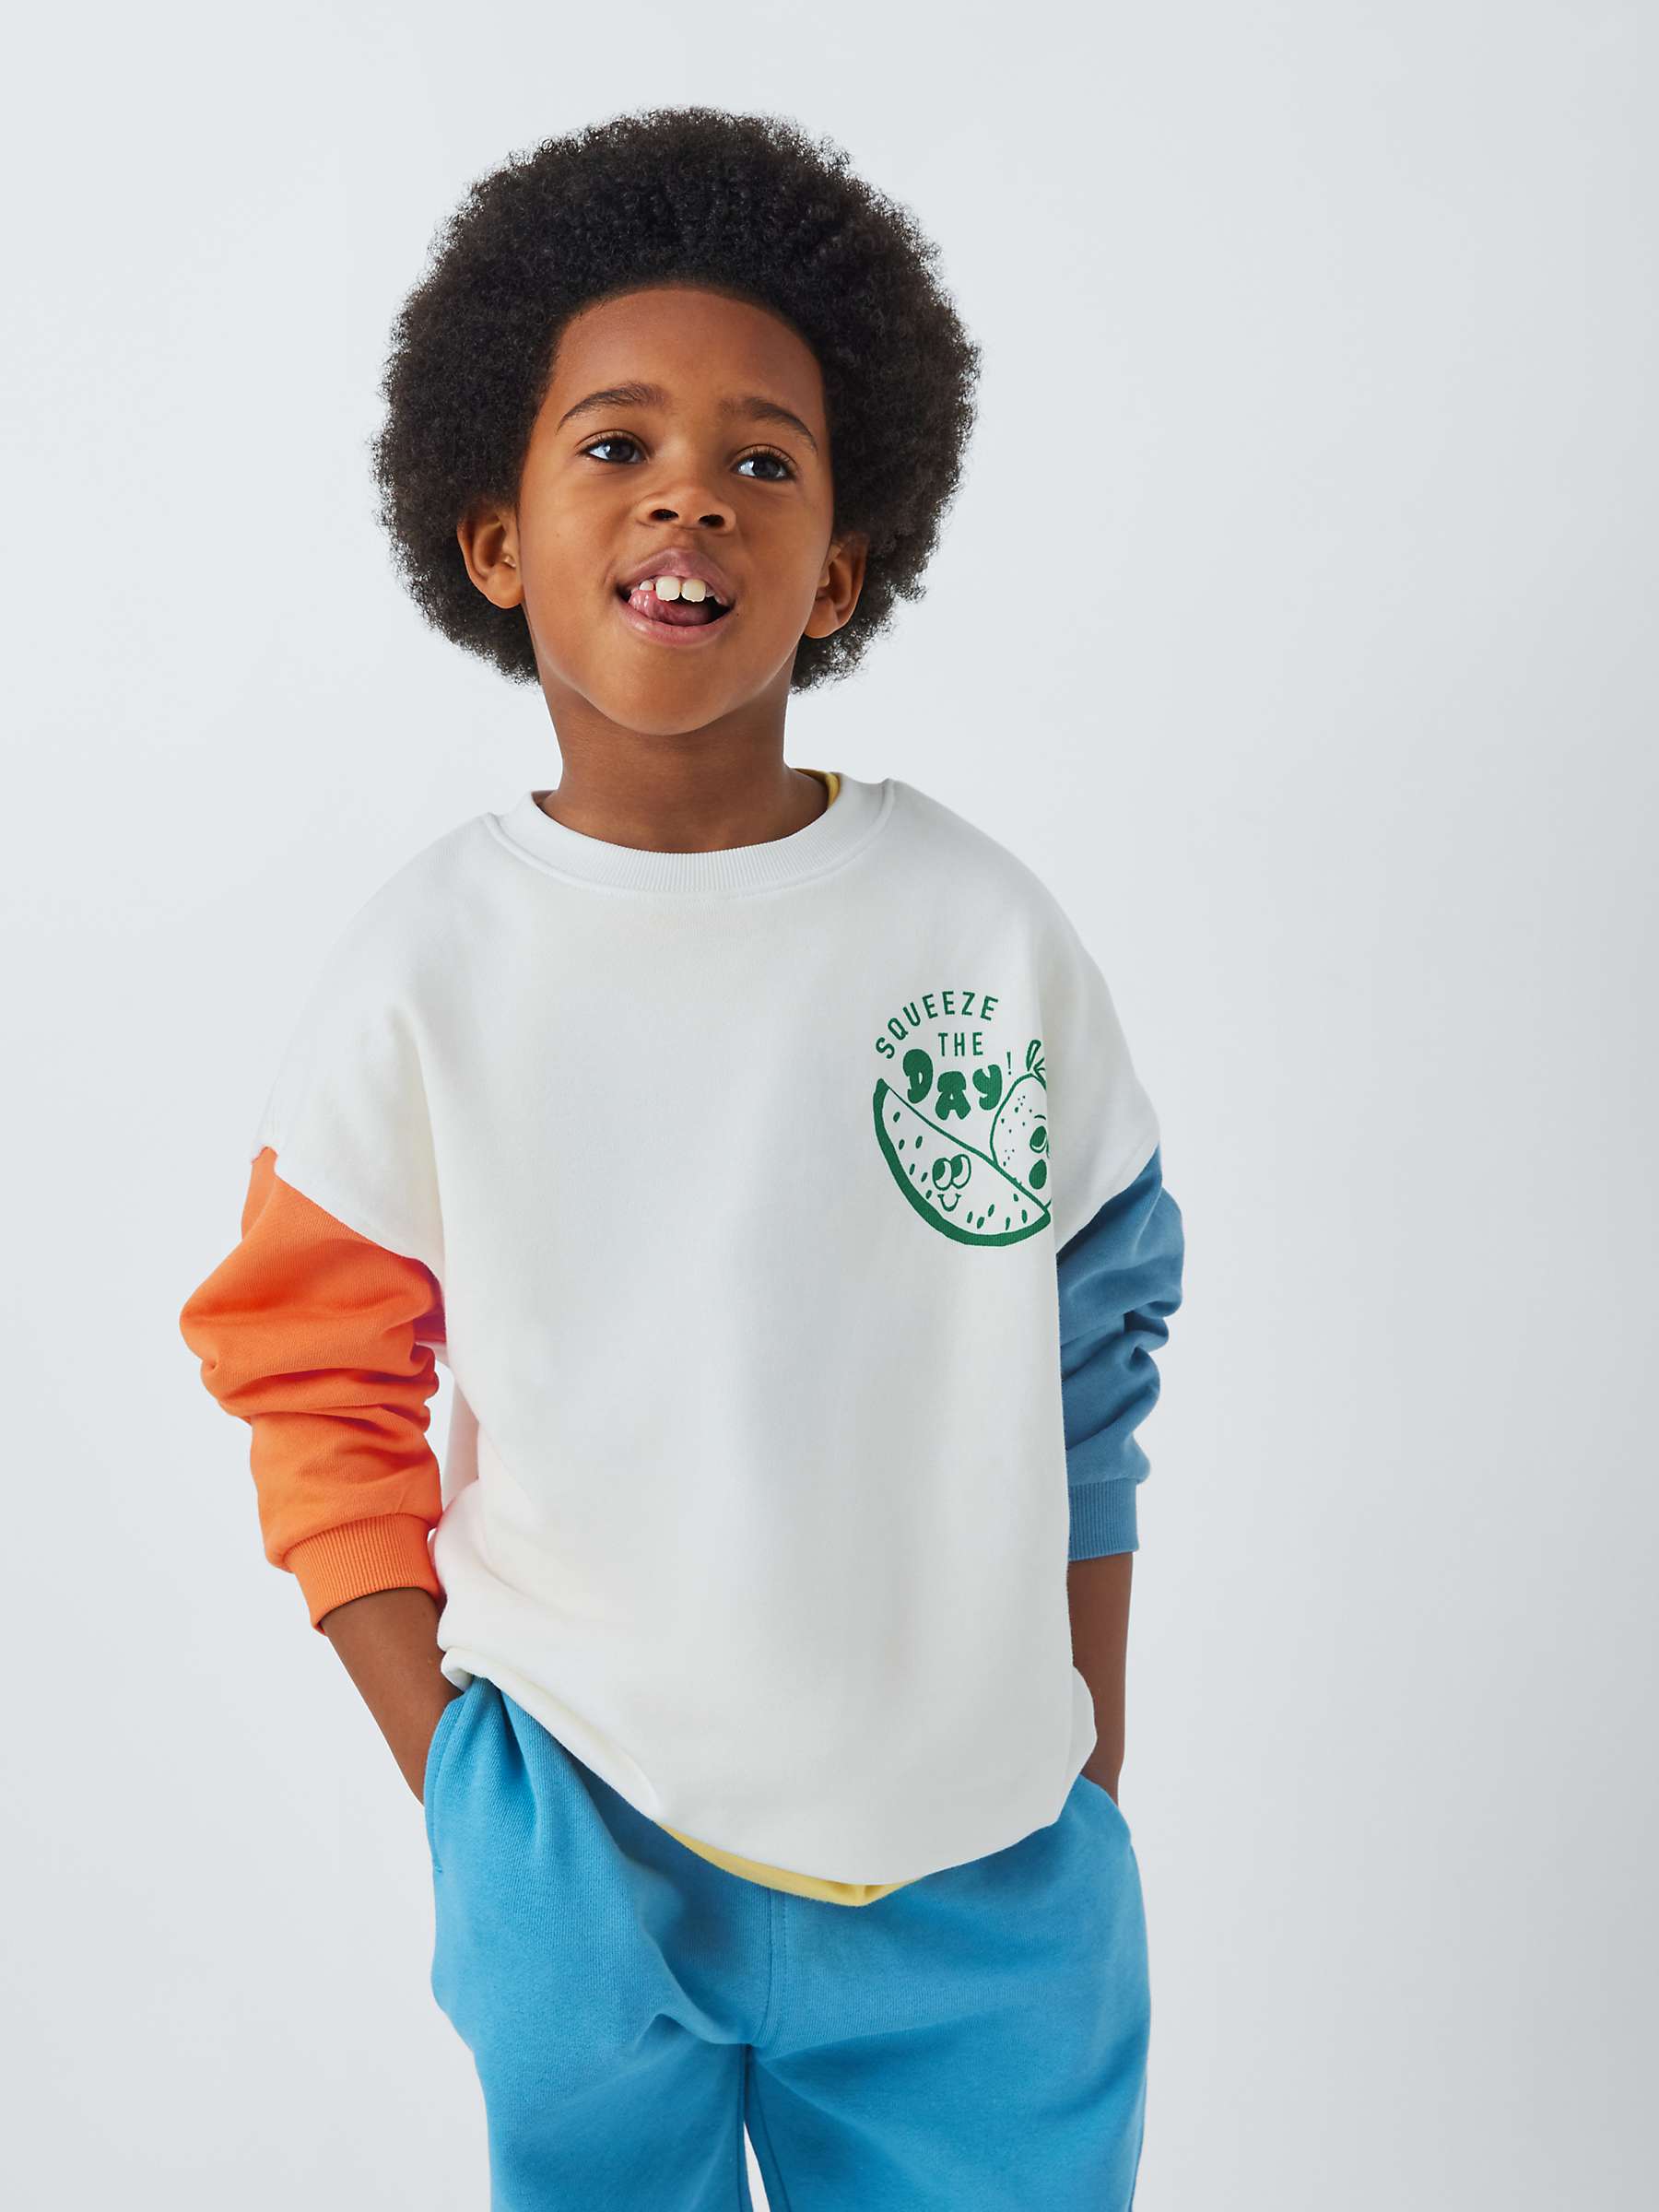 Buy John Lewis ANYDAY Kids' Squeeze The Day Oversized Sweatshirt, Multi Online at johnlewis.com